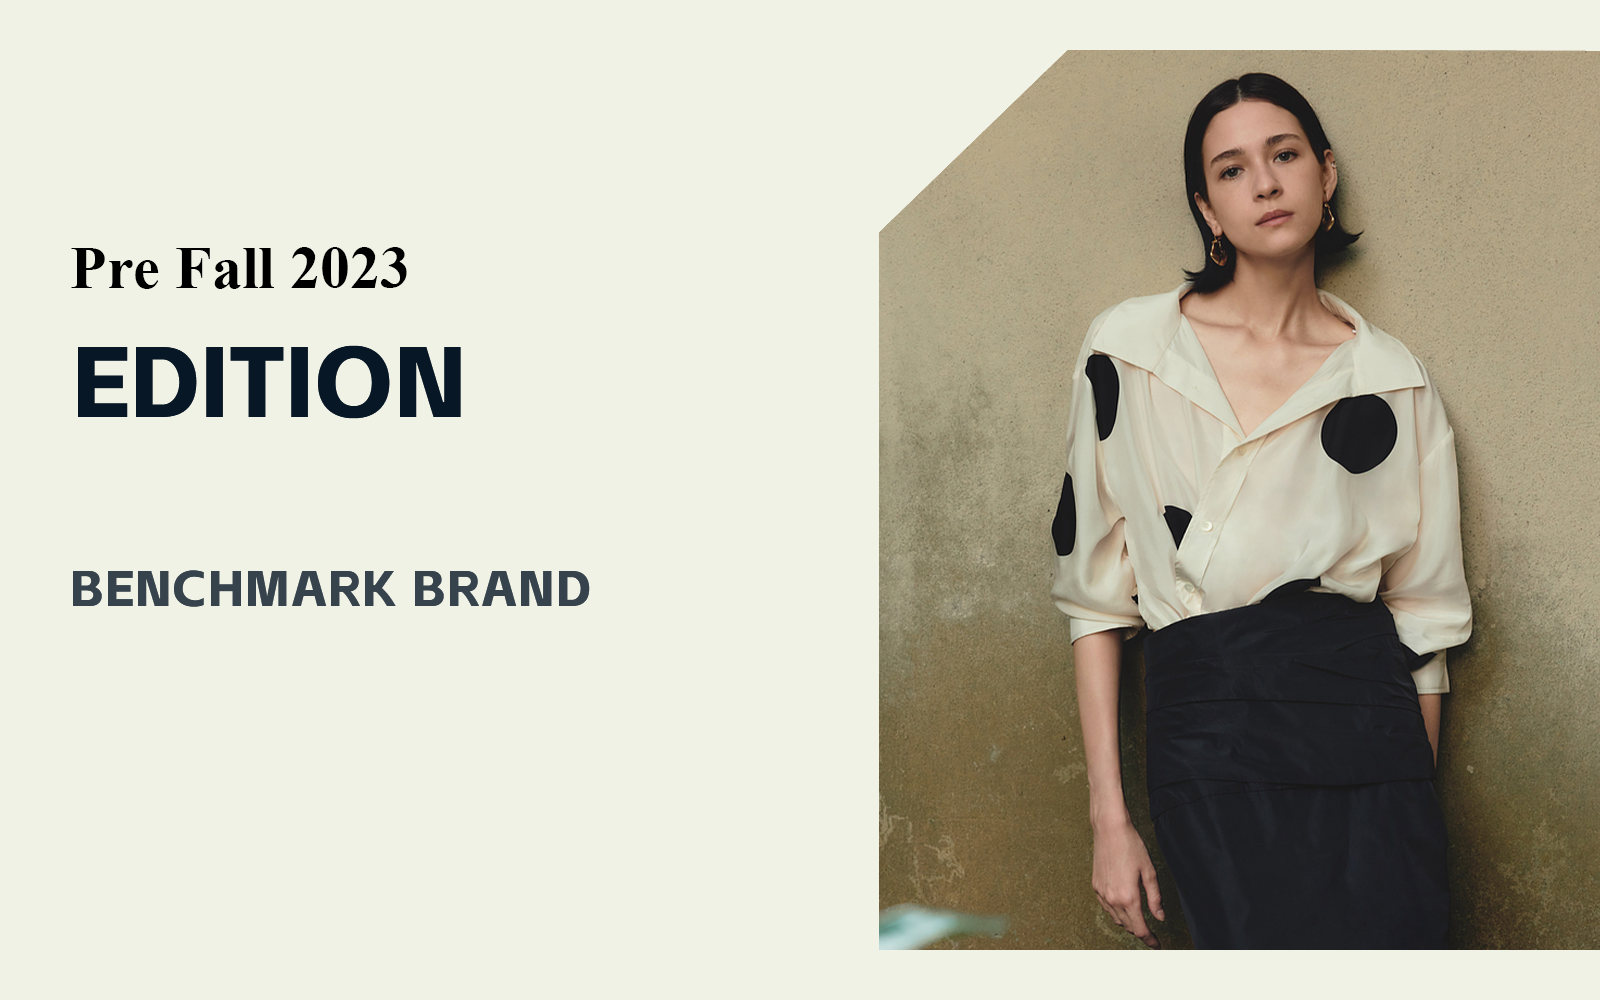 The Analysis of Edition The Benchmark Womenswear Brand